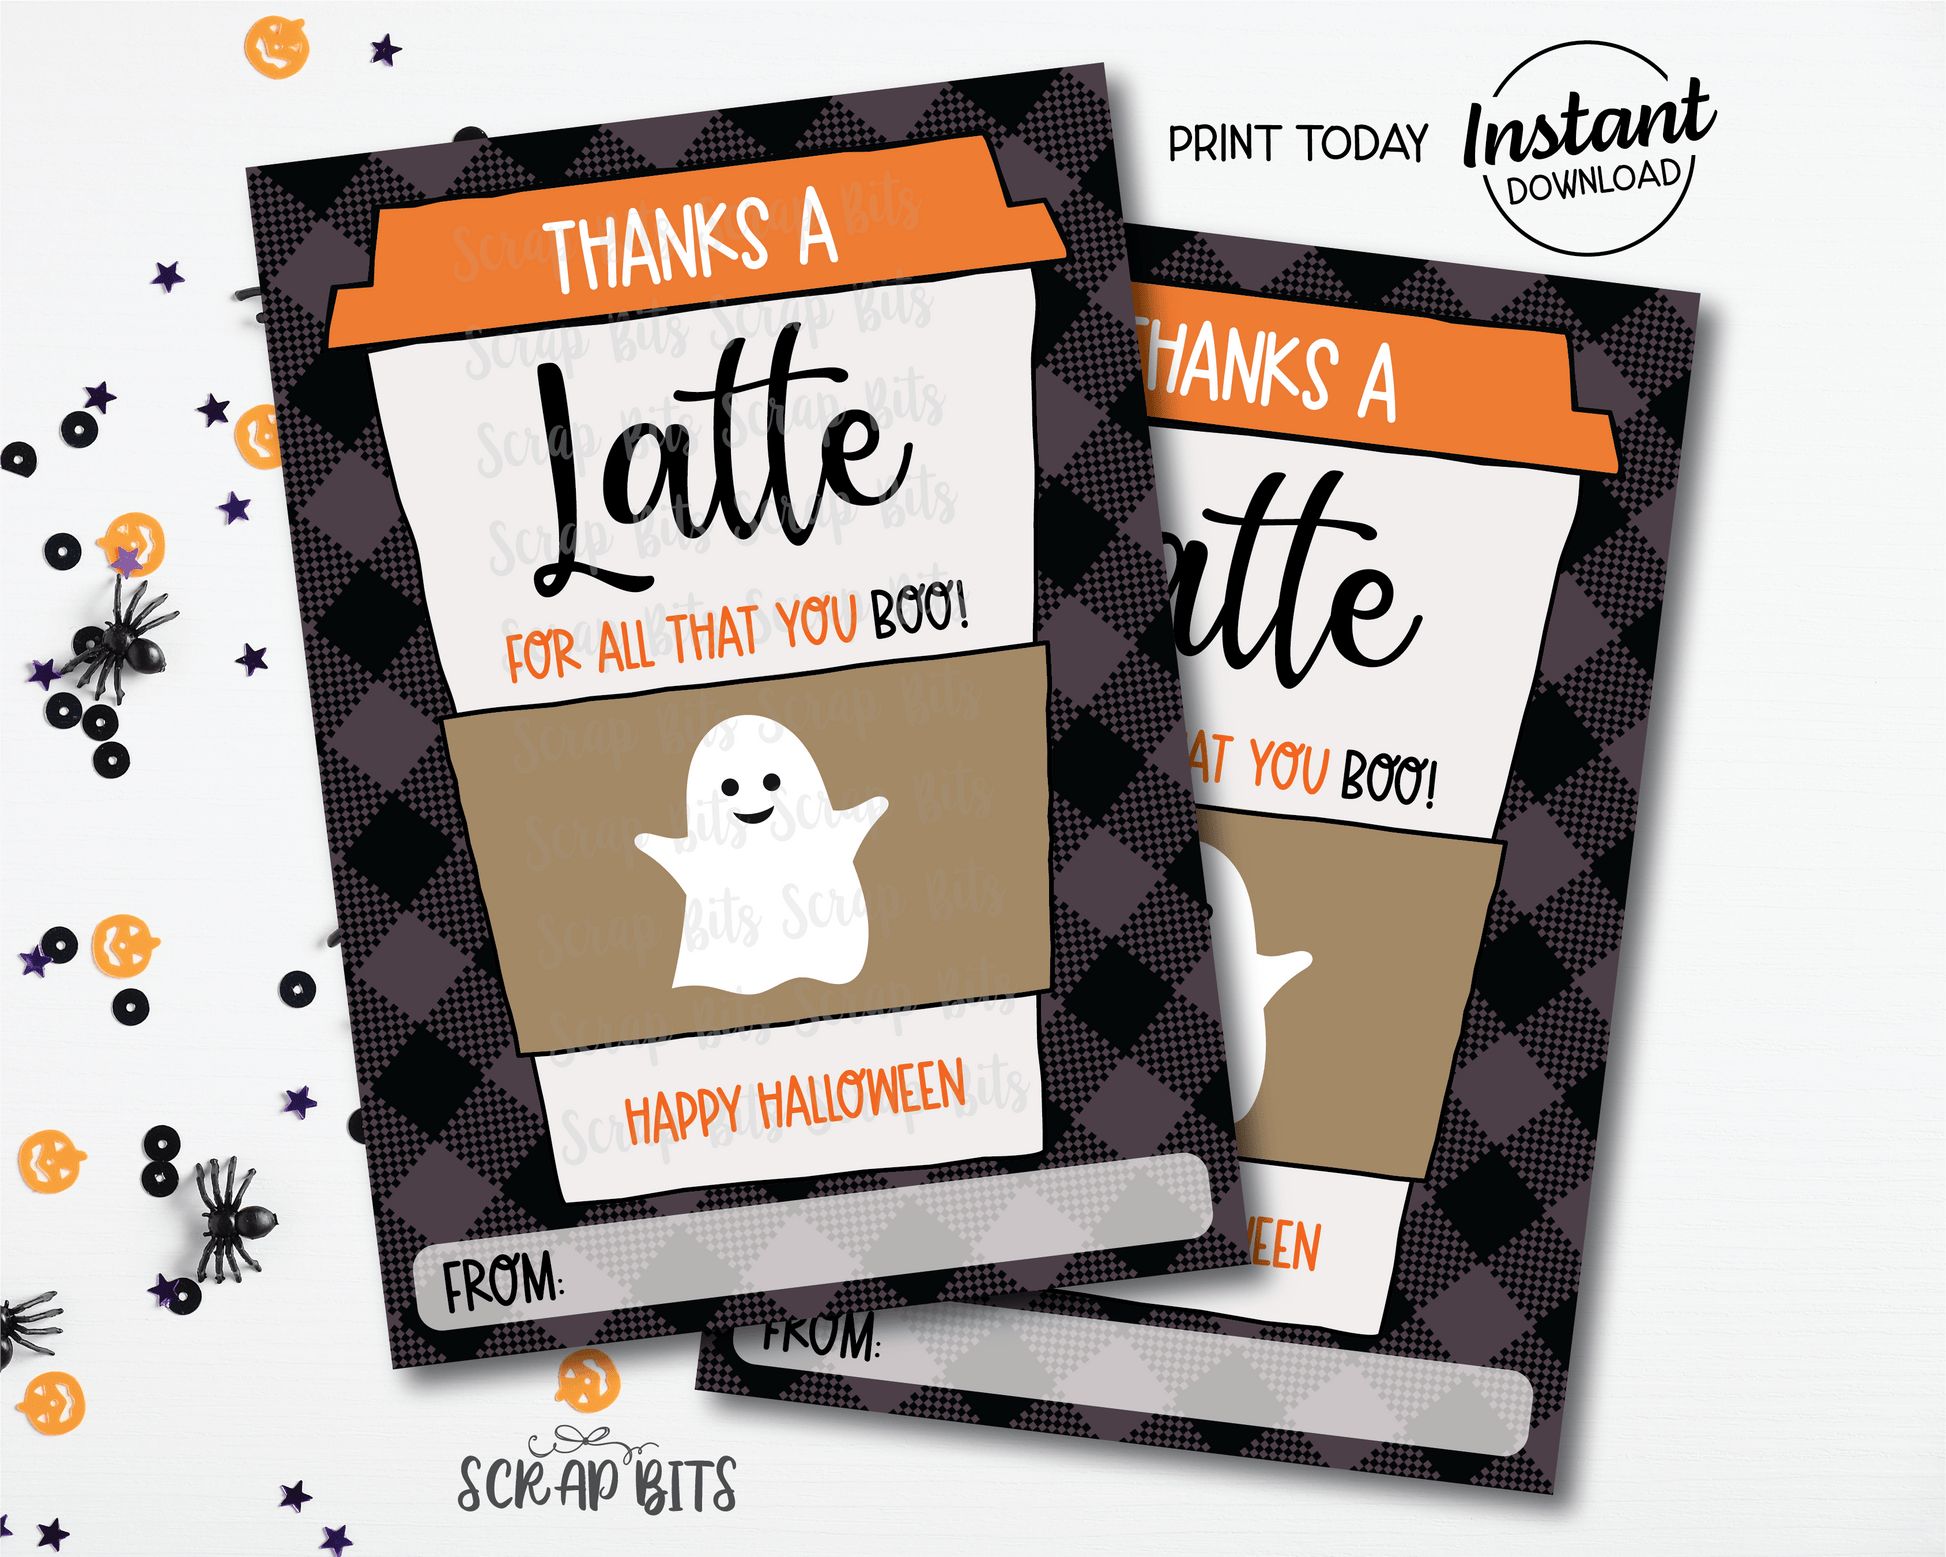 Thanks A Latte For All That You BOO, Printable Halloween Gift Card Holder for Coffee, Instant Download - Scrap Bits